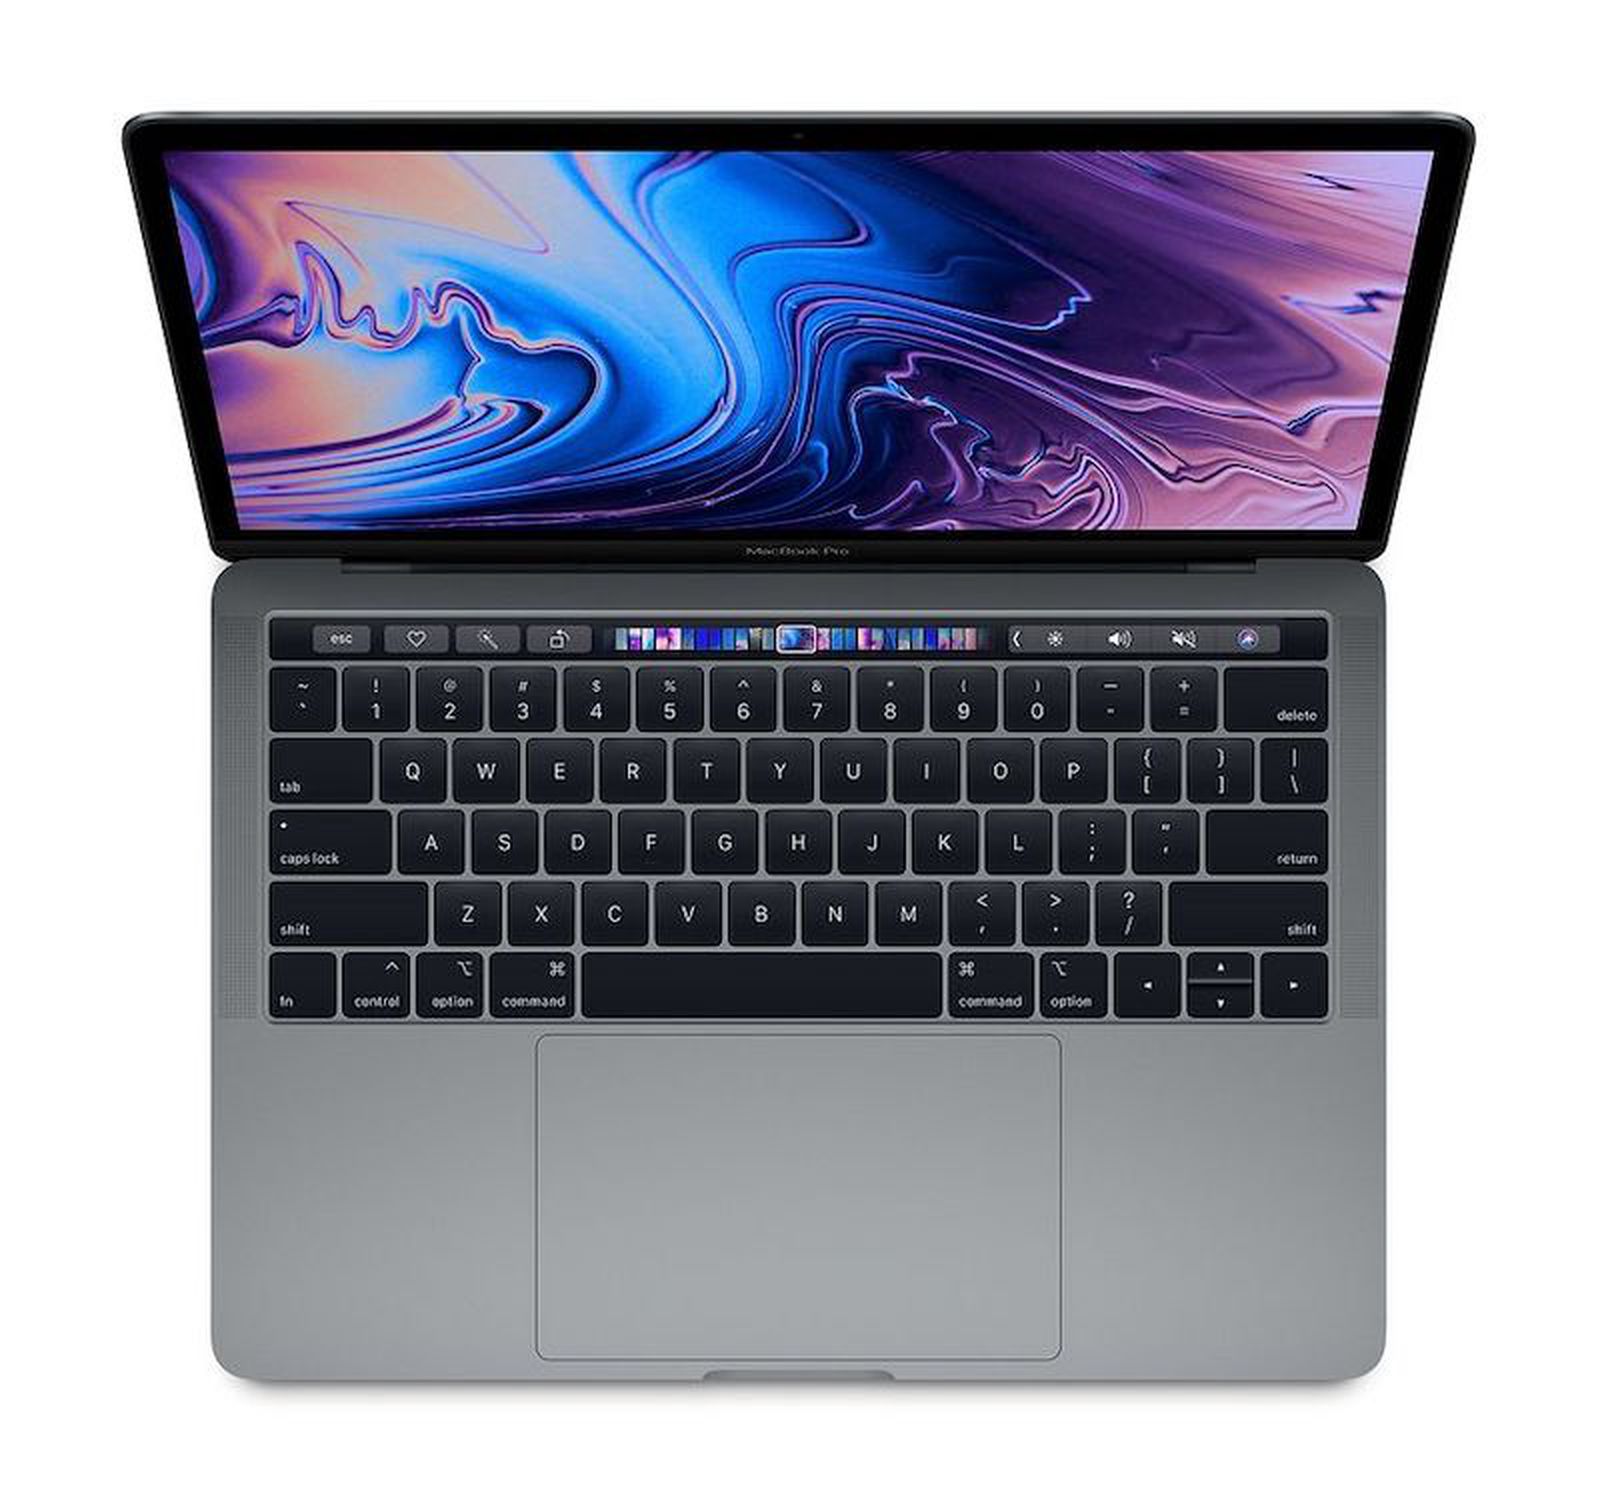 Base 19 13 Inch Macbook Pro Is Up To Faster Than Previous Generation In Benchmarks Macrumors